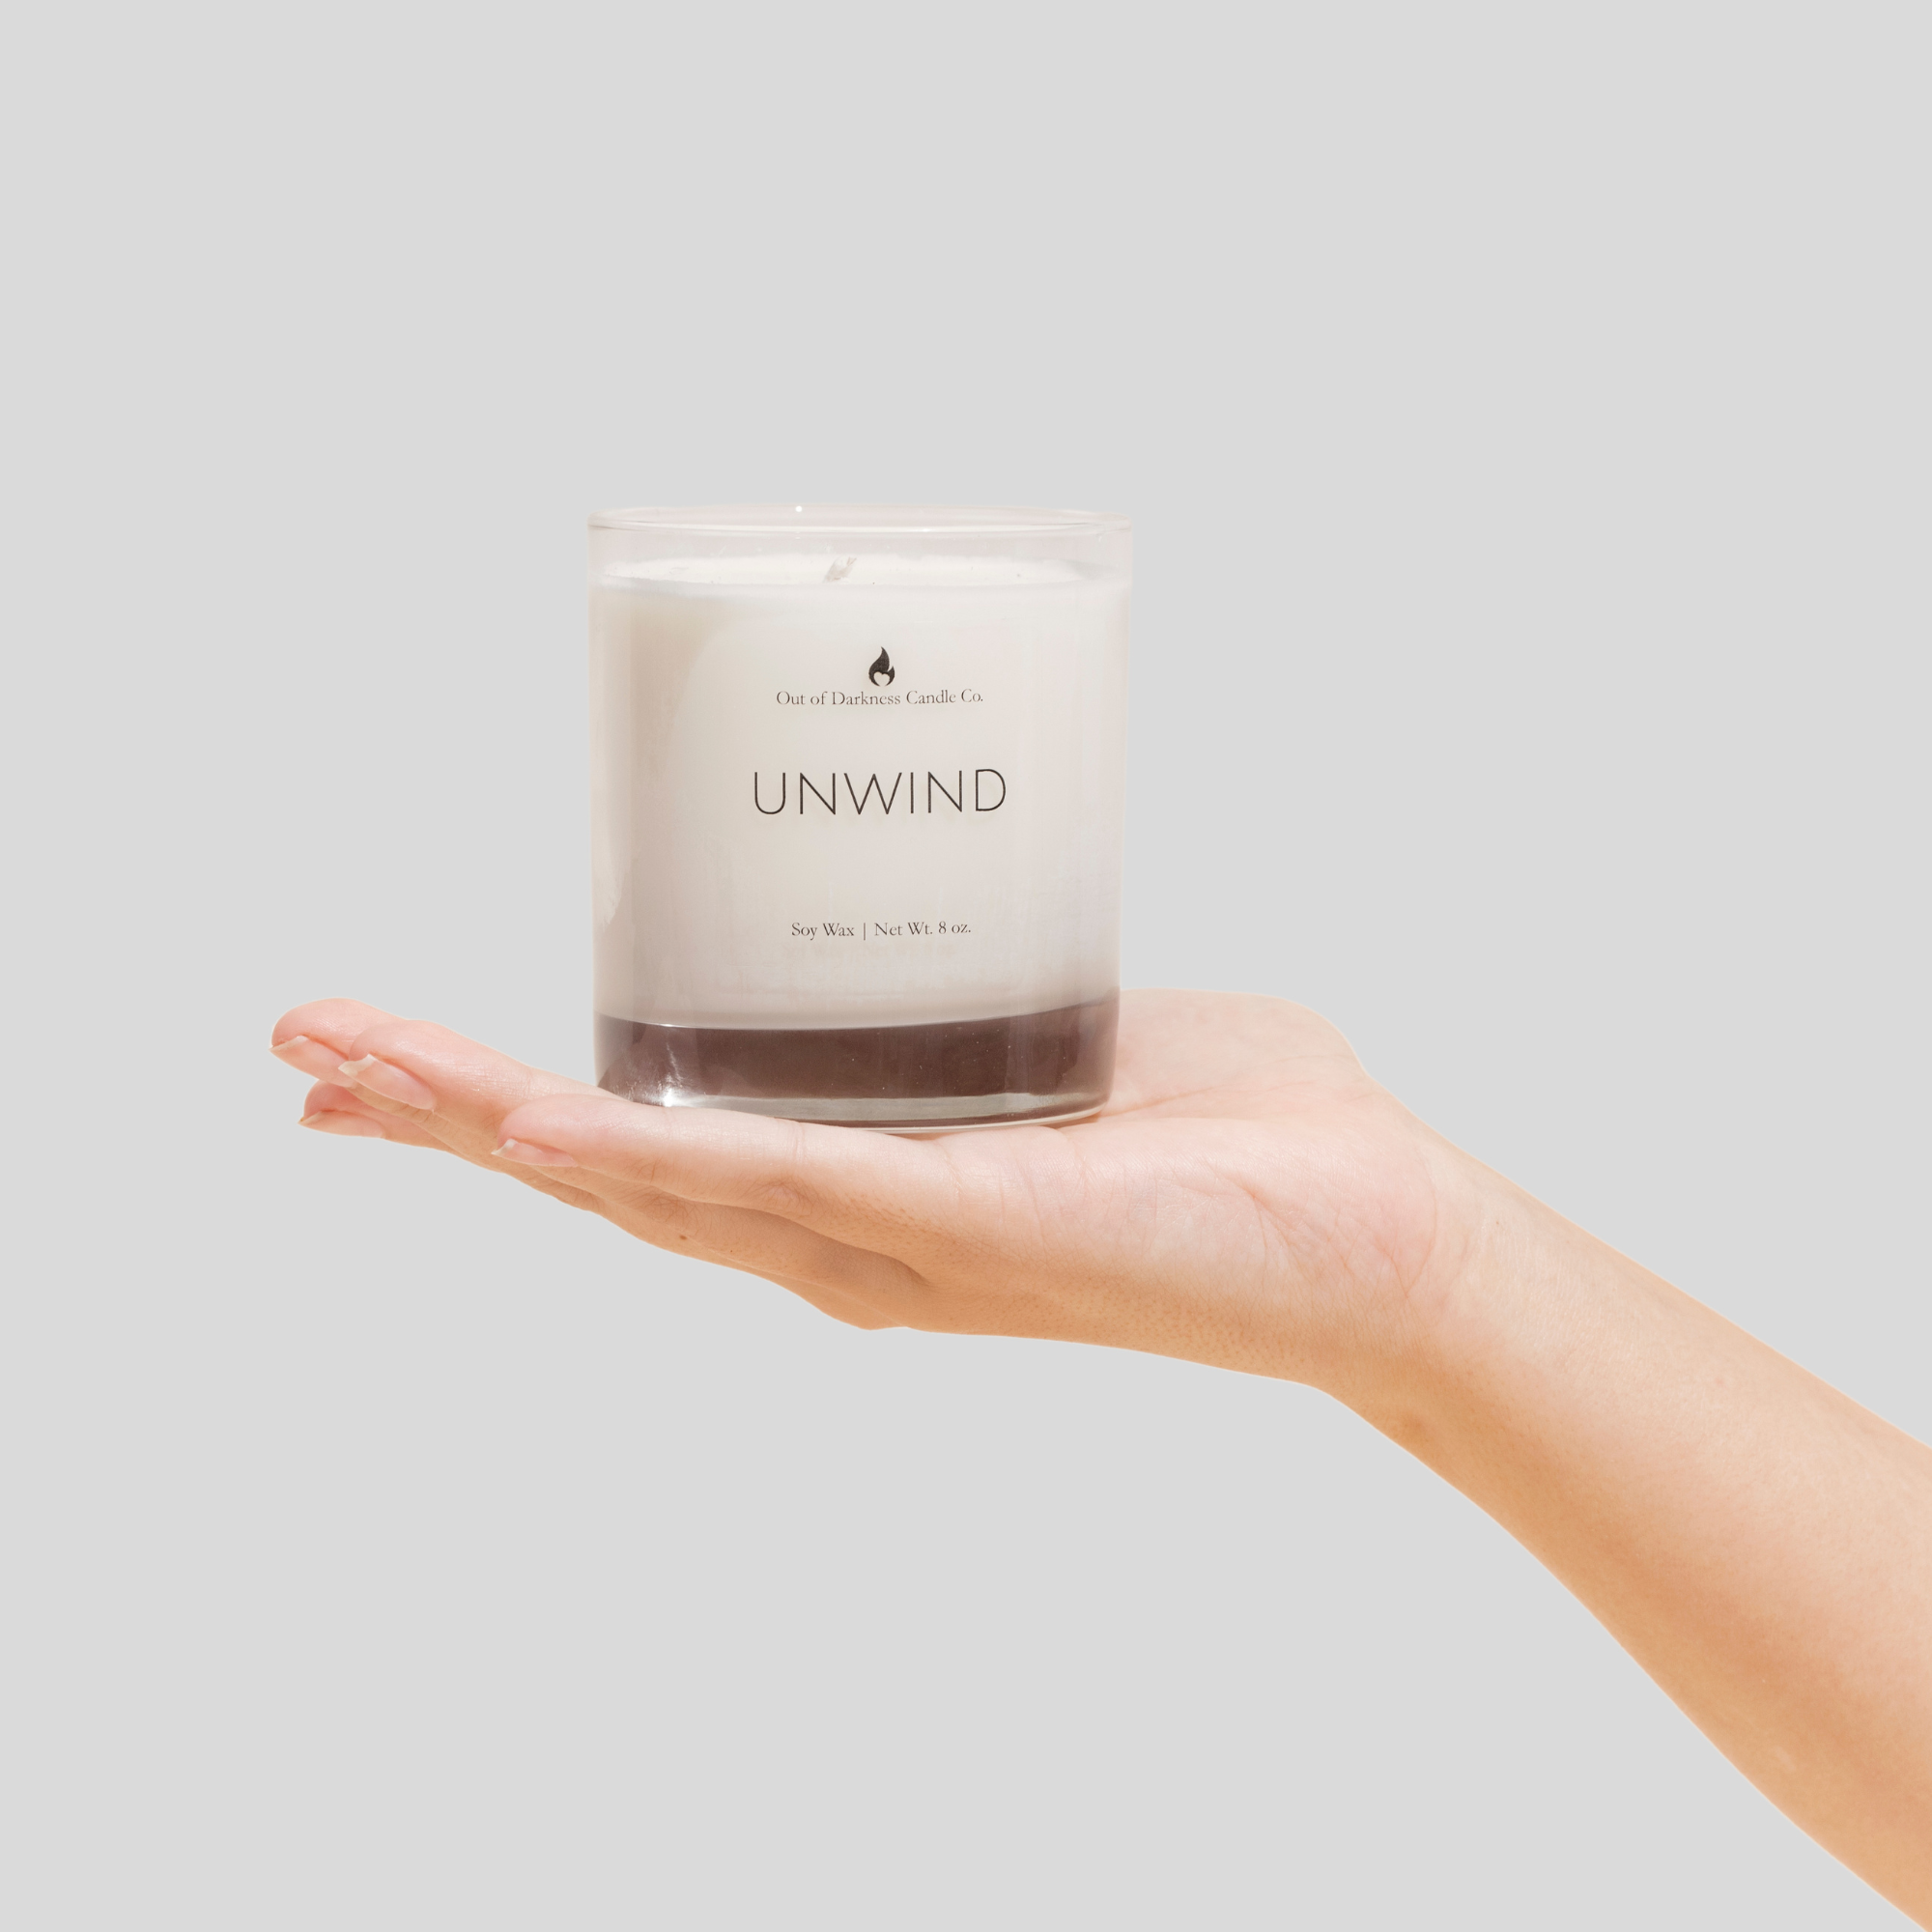 clear glass jar candle says unwind being held up by hand